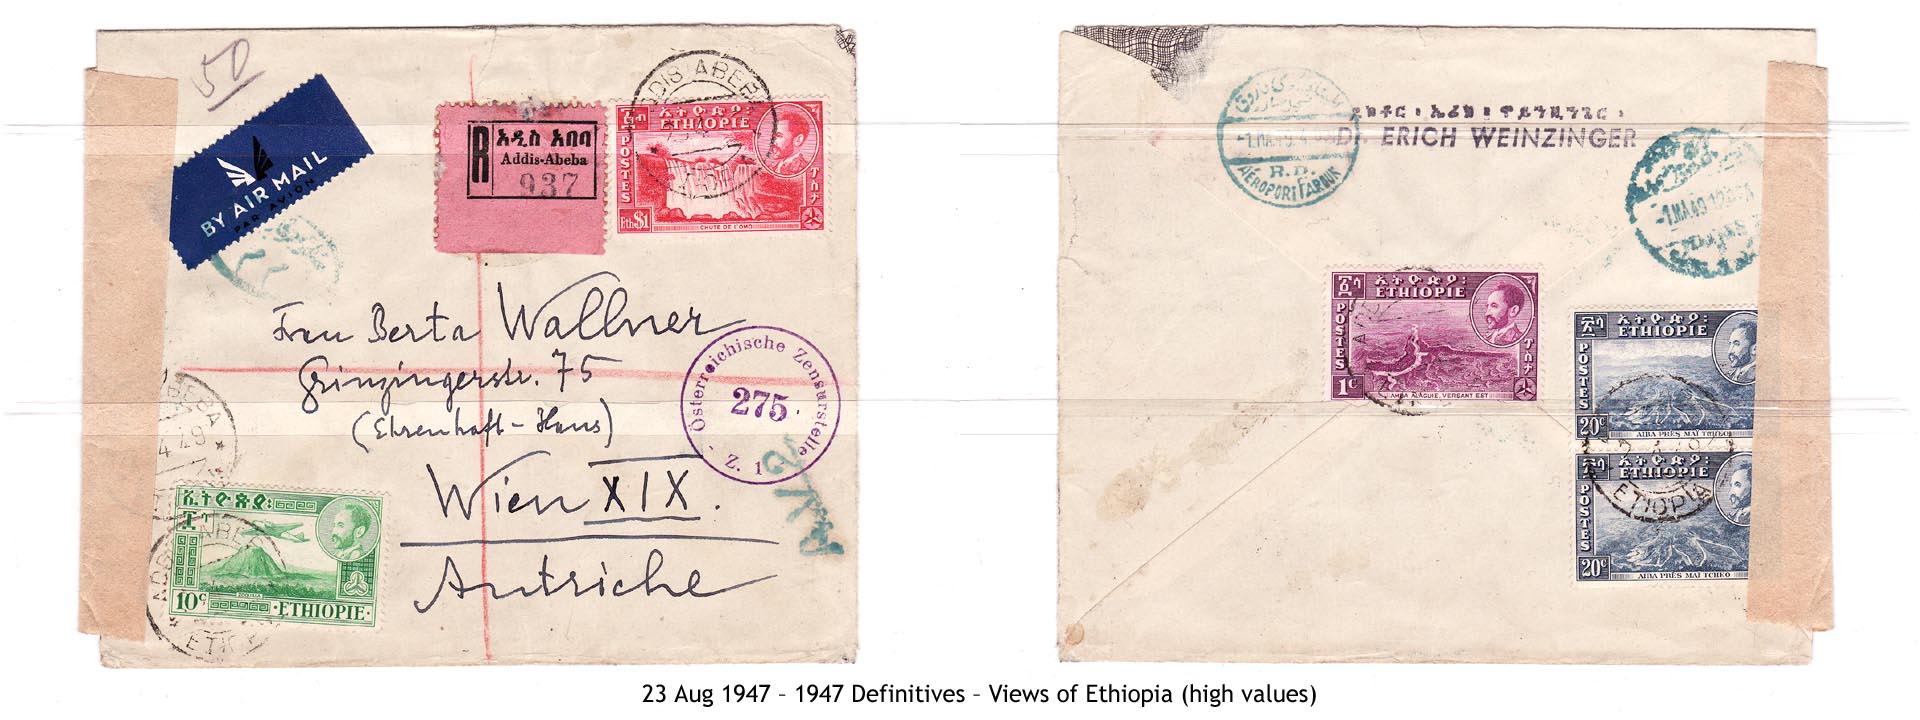 19470823 – 1947 Definitives – Views of Ethiopia (high values)